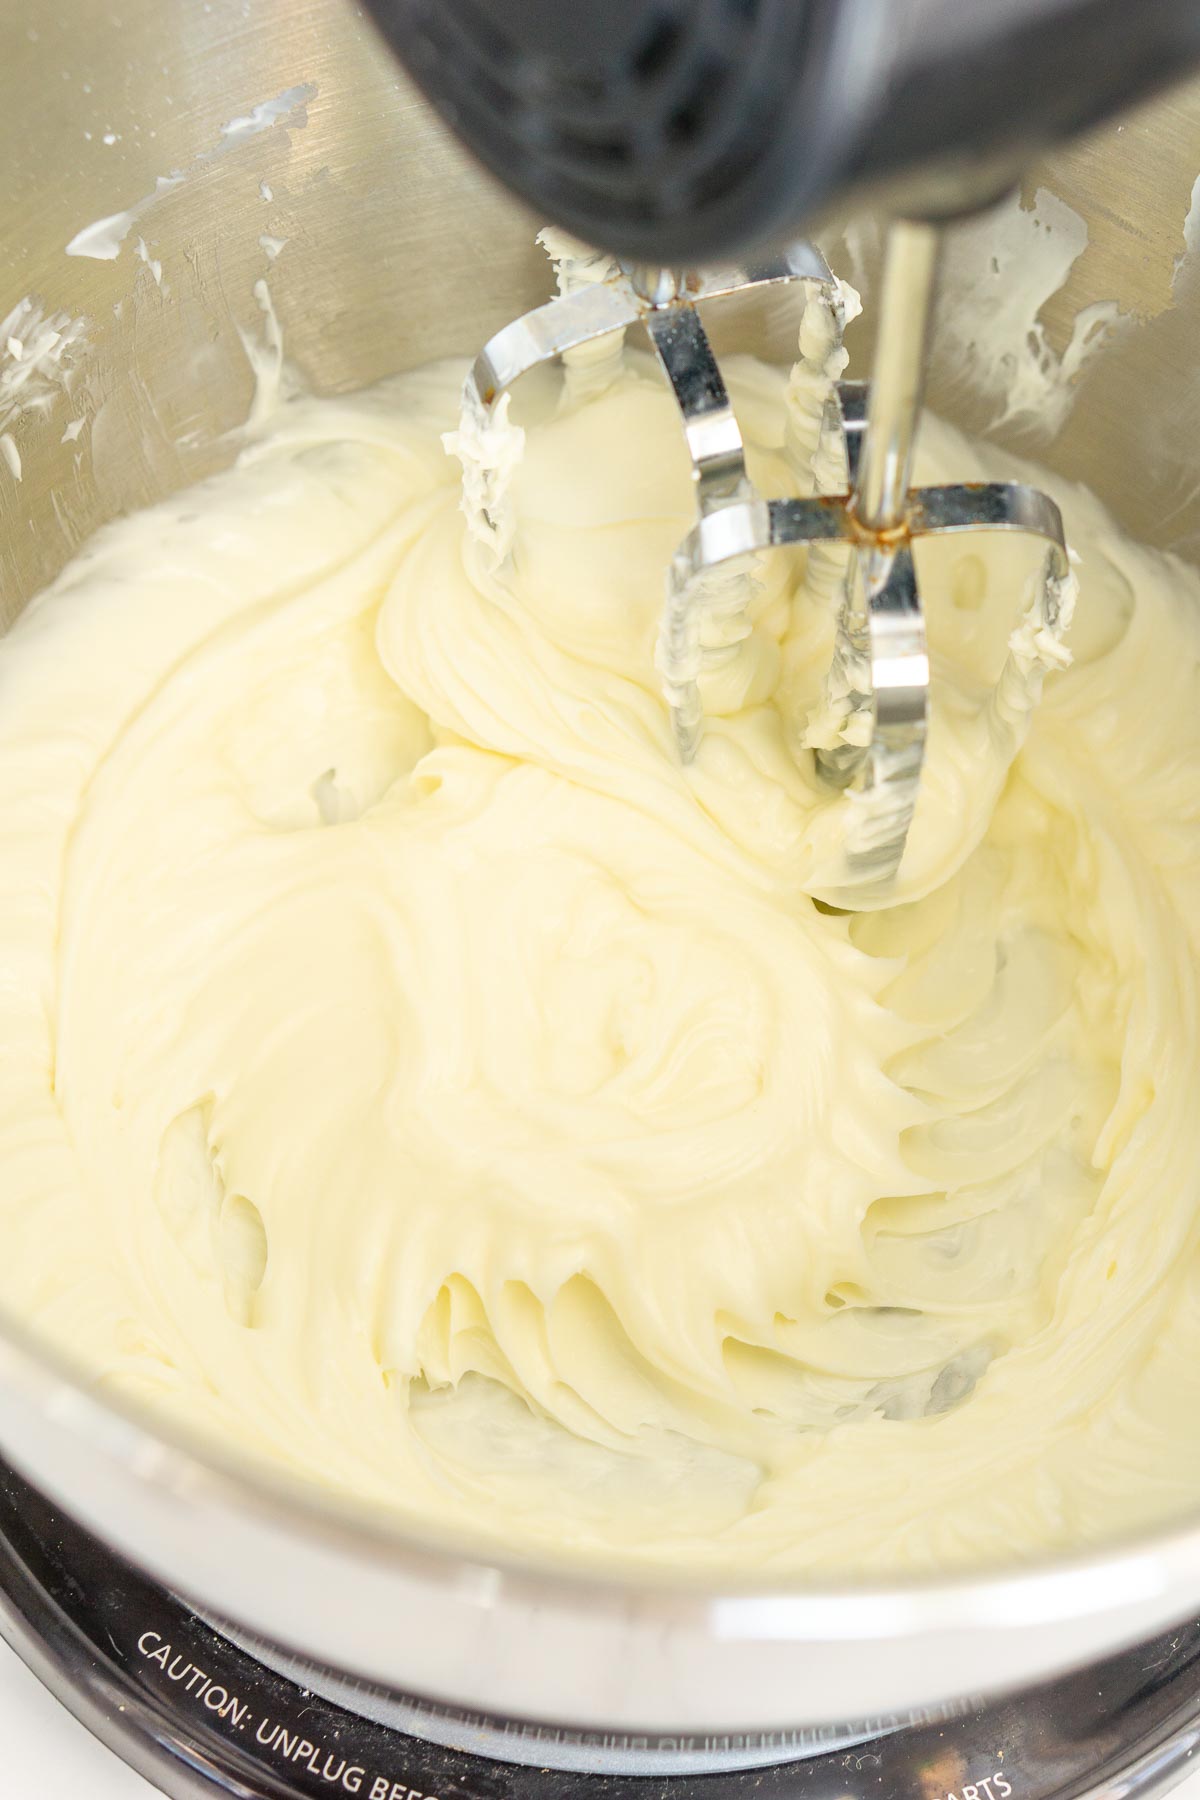 Whipping cream cheese with a stand mixer.